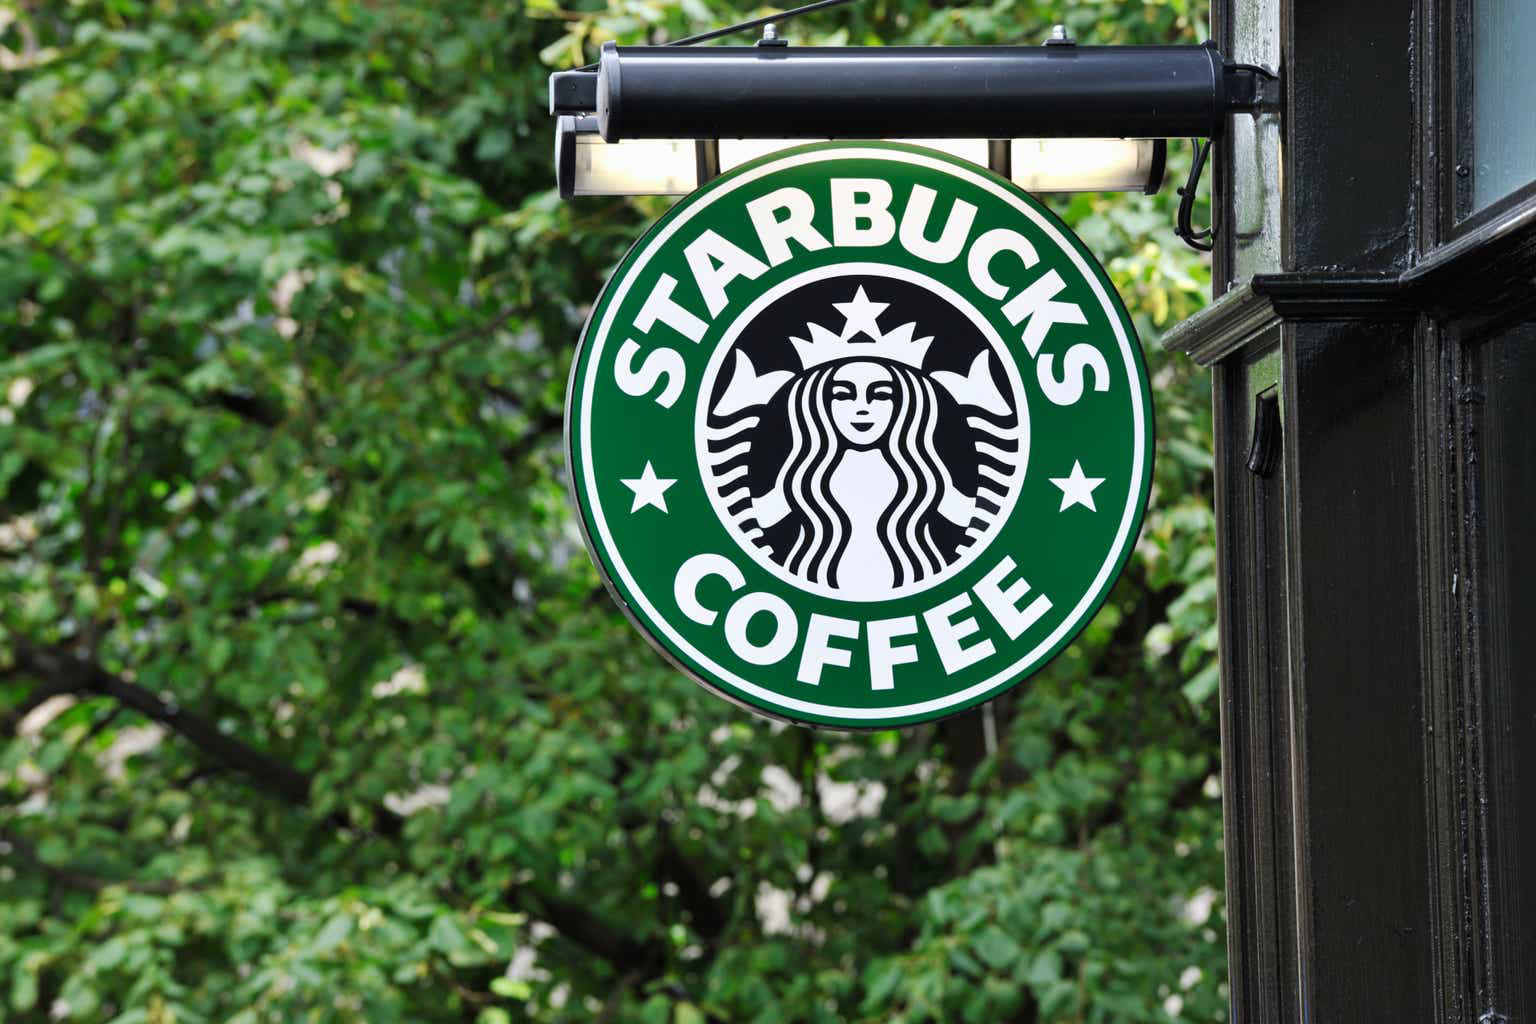 Starbuck adds new food and beverage items to its menu